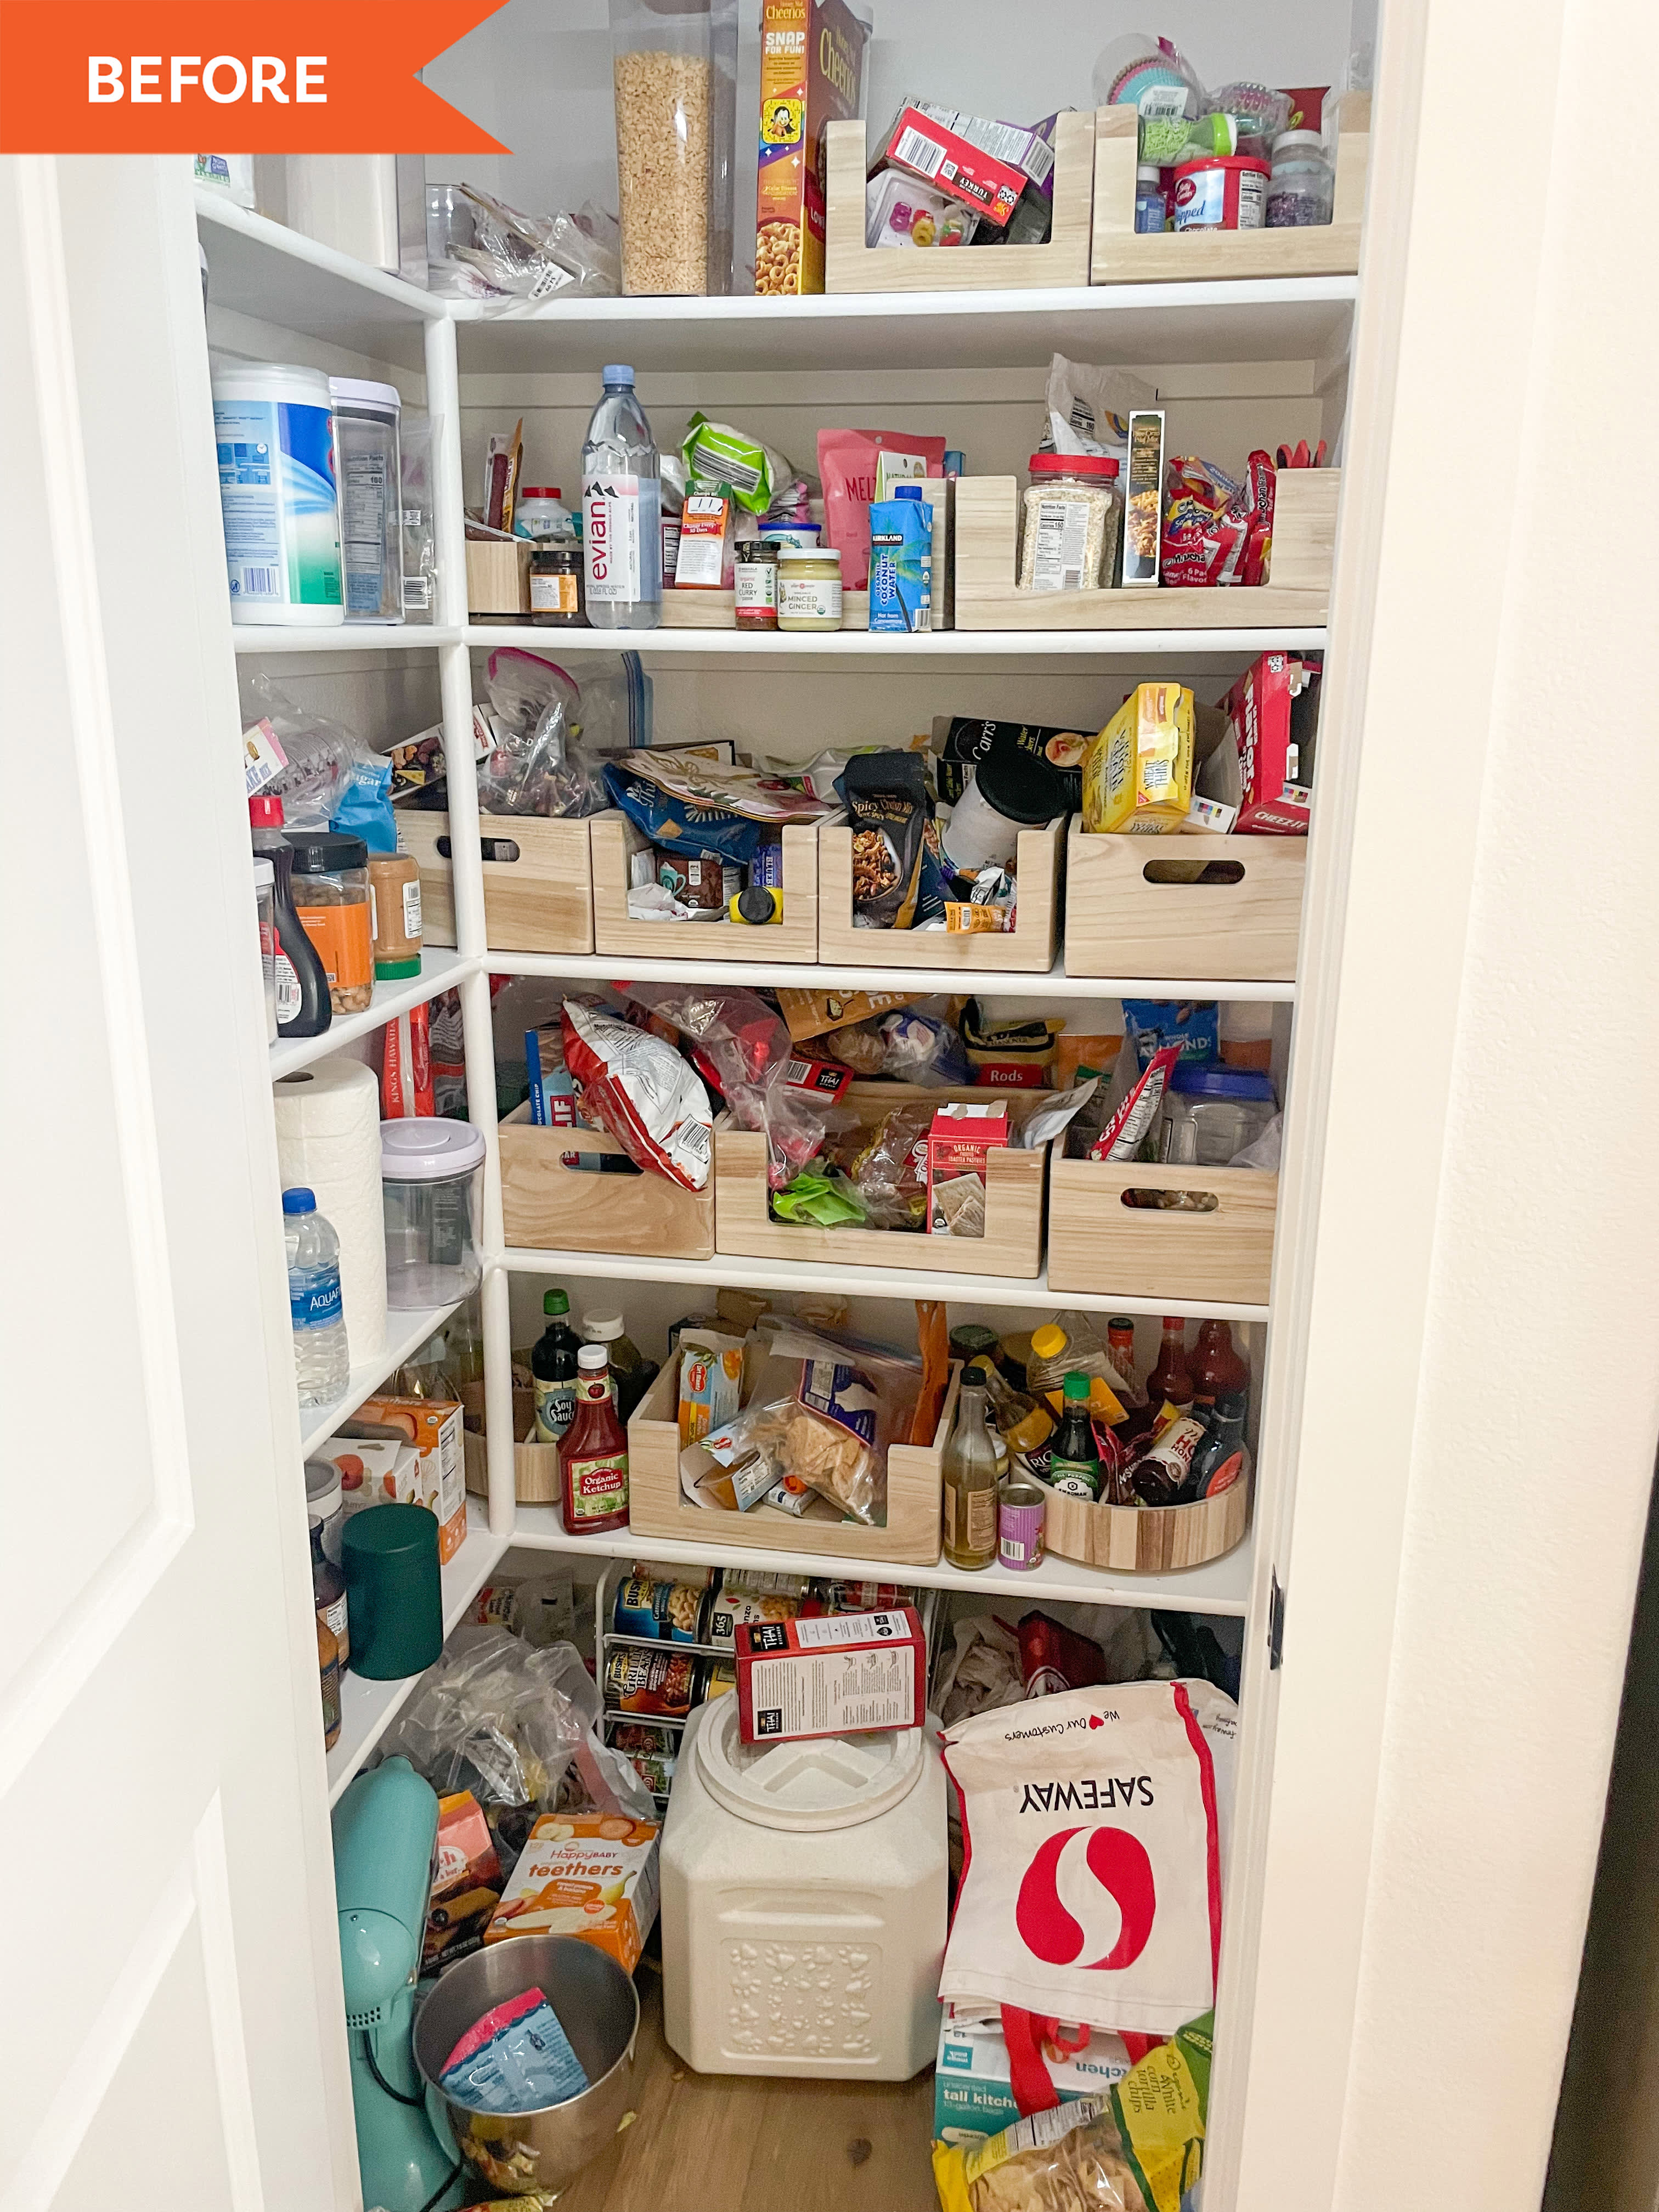 https://cdn.apartmenttherapy.info/image/upload/v1662995806/at/organize-clean/before-after/Nicole%20Bolf%20Pantry/NicoleBolf_Before1.jpg